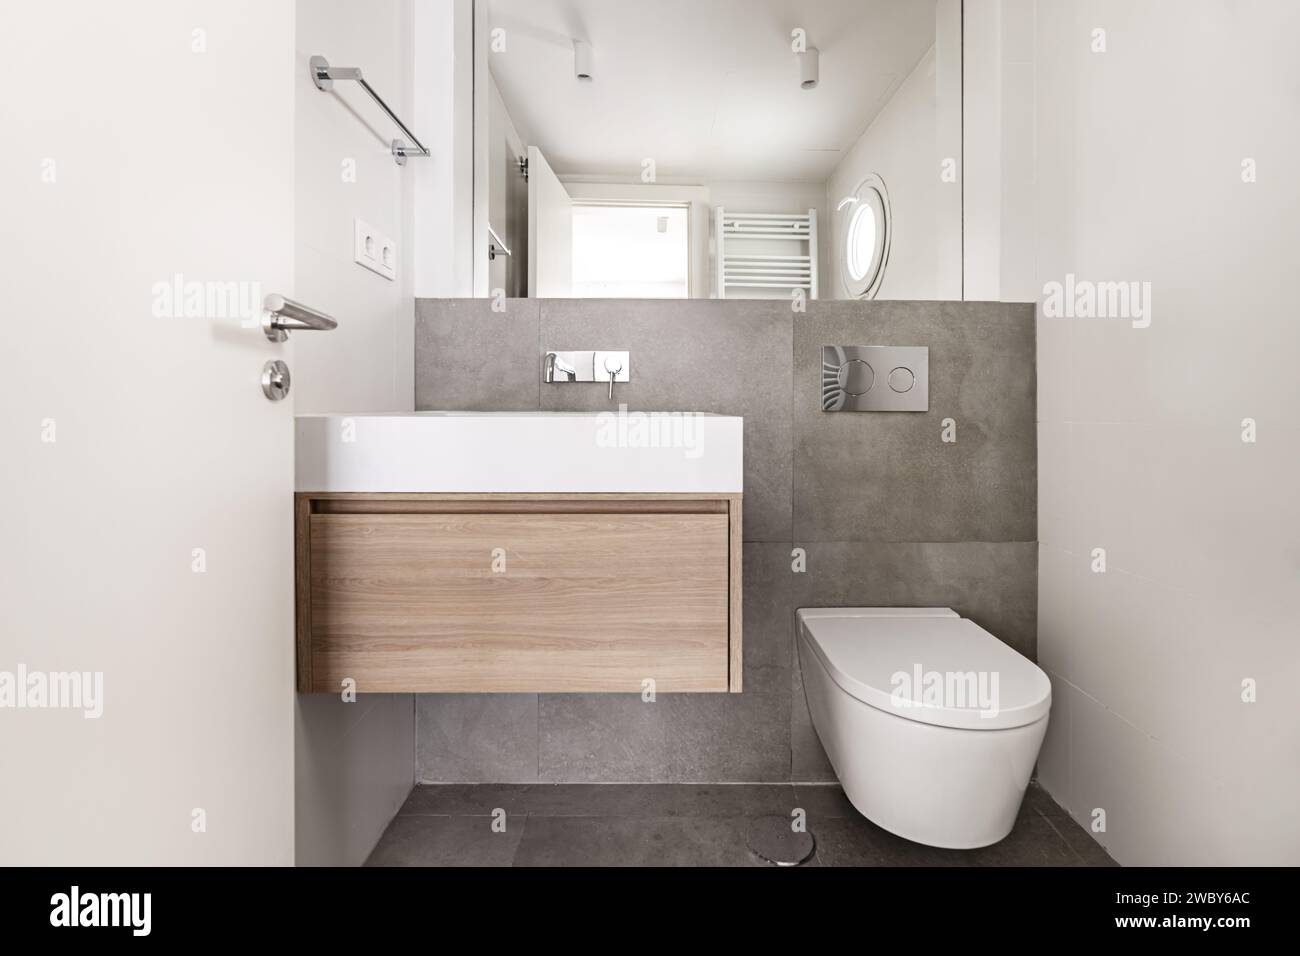 Front image of a small bathroom with marble effect tiled walls, integrated wall mirror, and towel rack on the wall Stock Photo